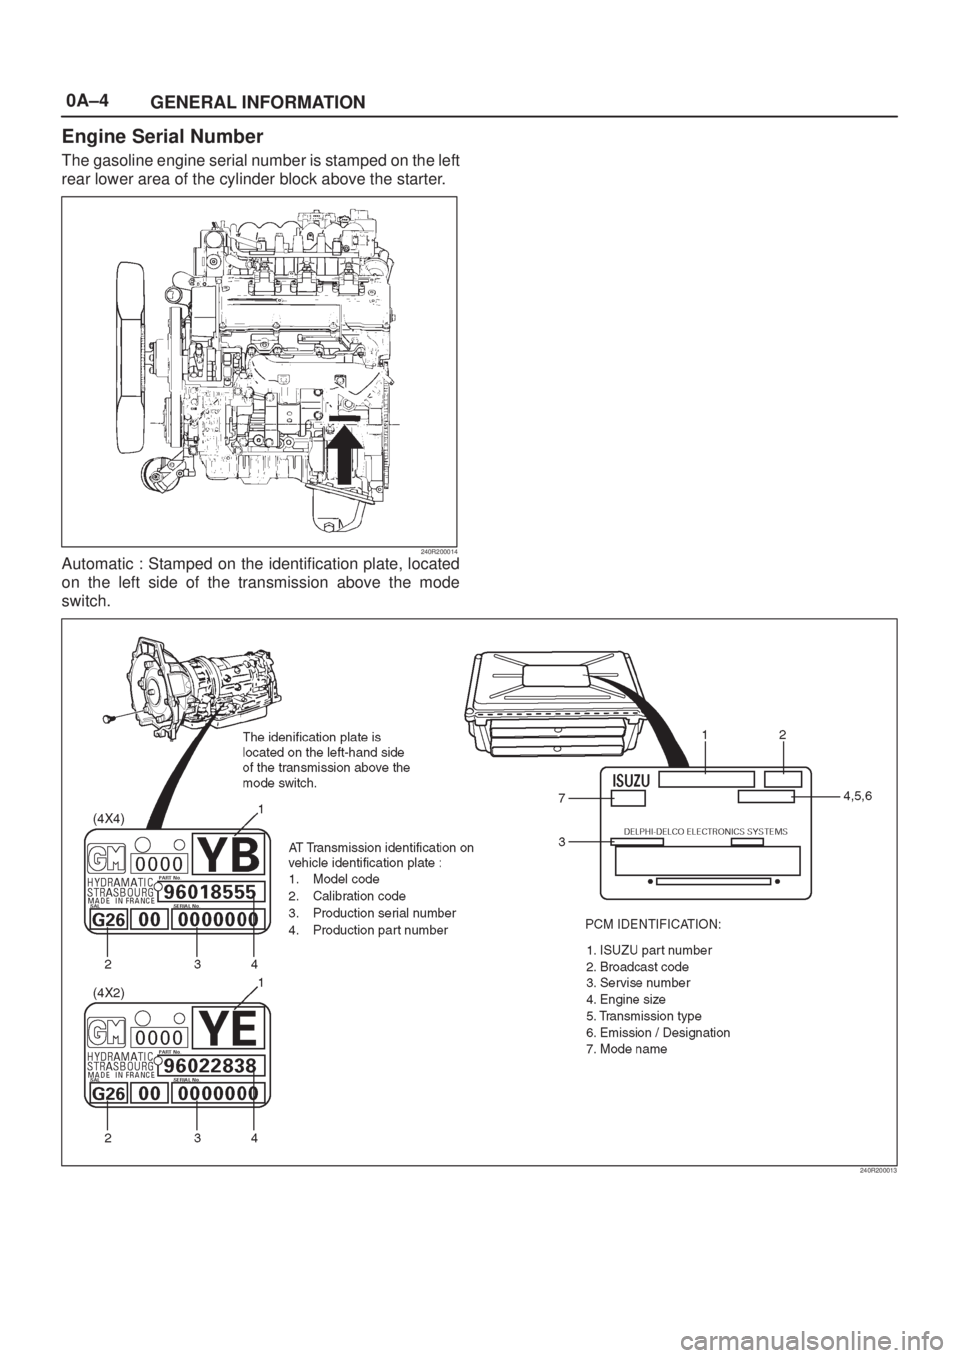 ISUZU AXIOM 2002  Service Repair Manual 0A±4
GENERAL INFORMATION
Engine Serial Number
The gasoline engine serial number is stamped on the left
rear lower area of the cylinder block above the starter.
240R200014Automatic : Stamped on the id